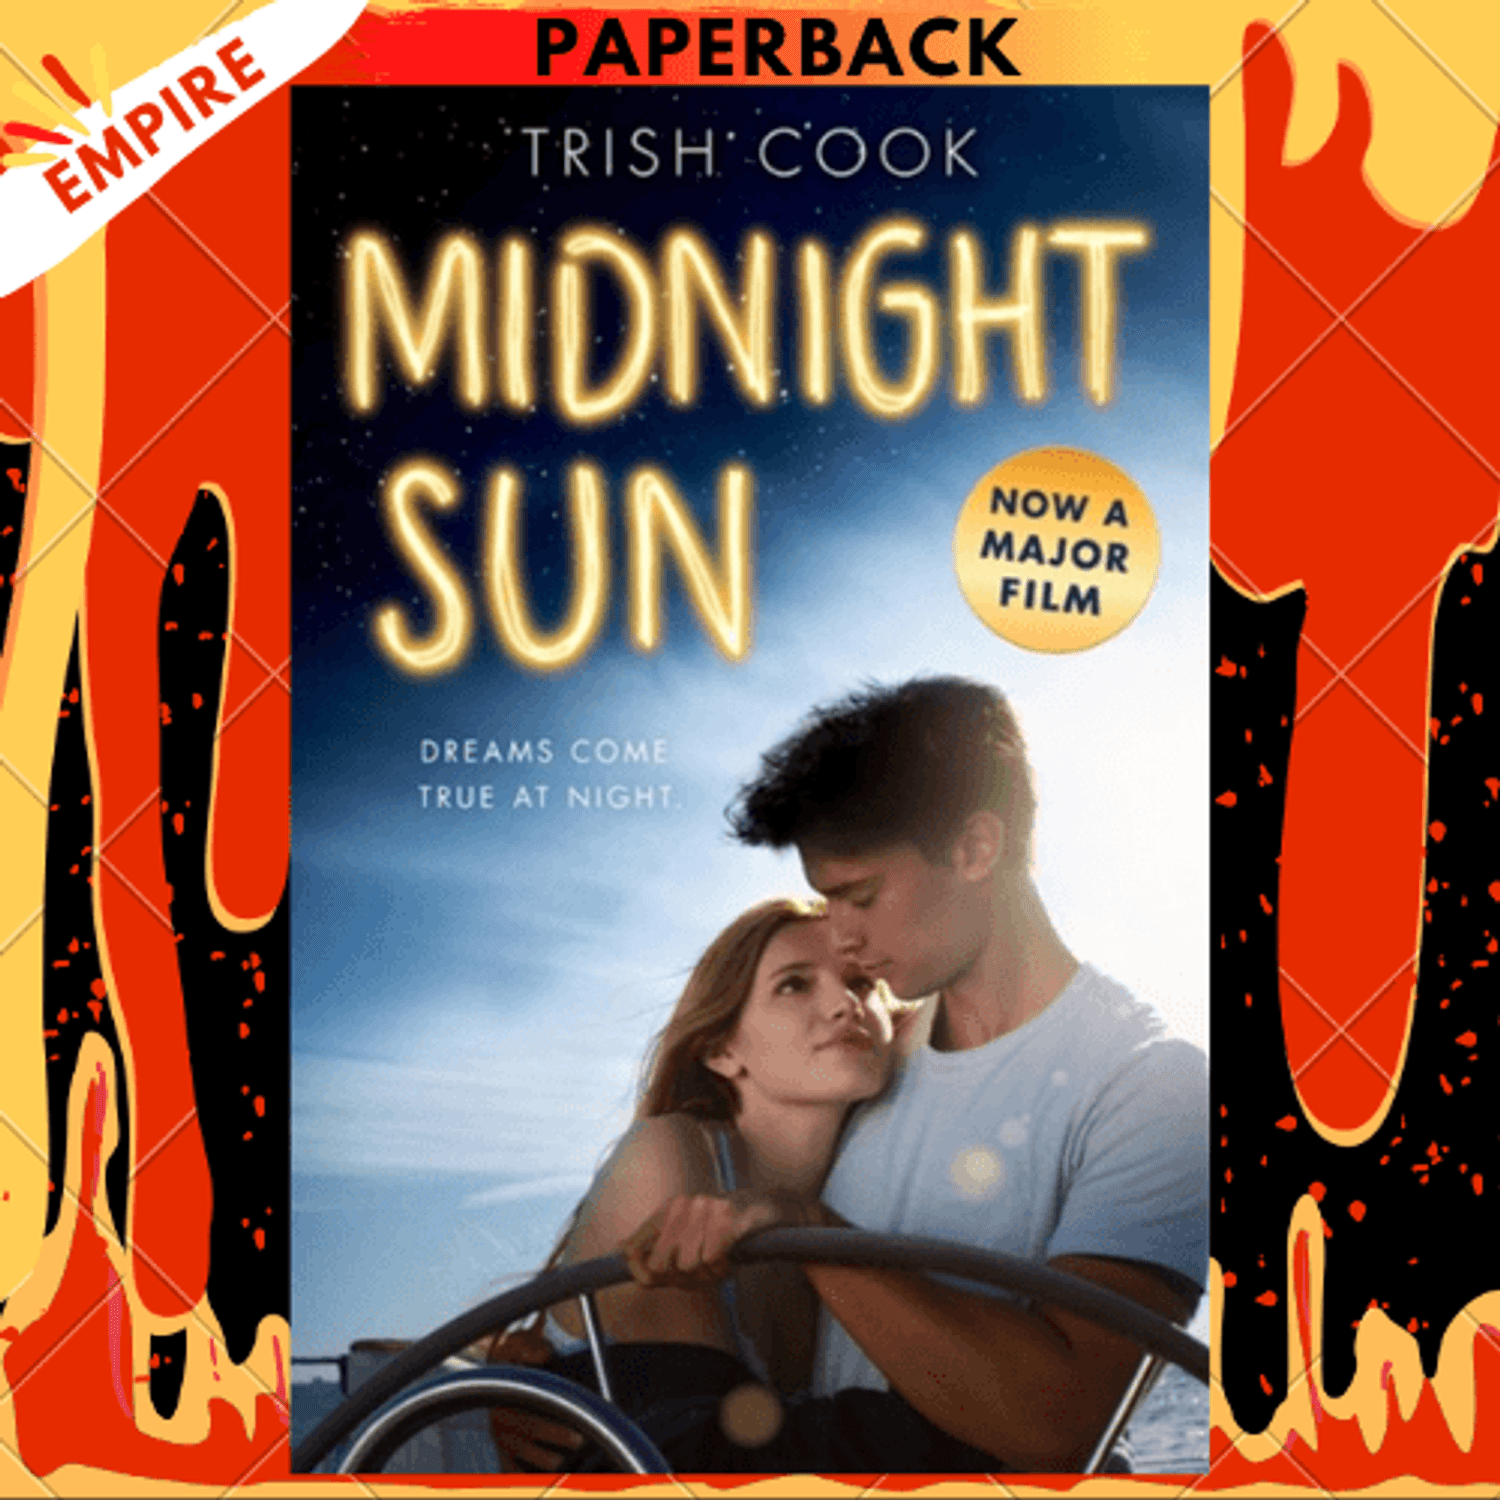 Midnight Sun - by Trish Cook (Paperback)